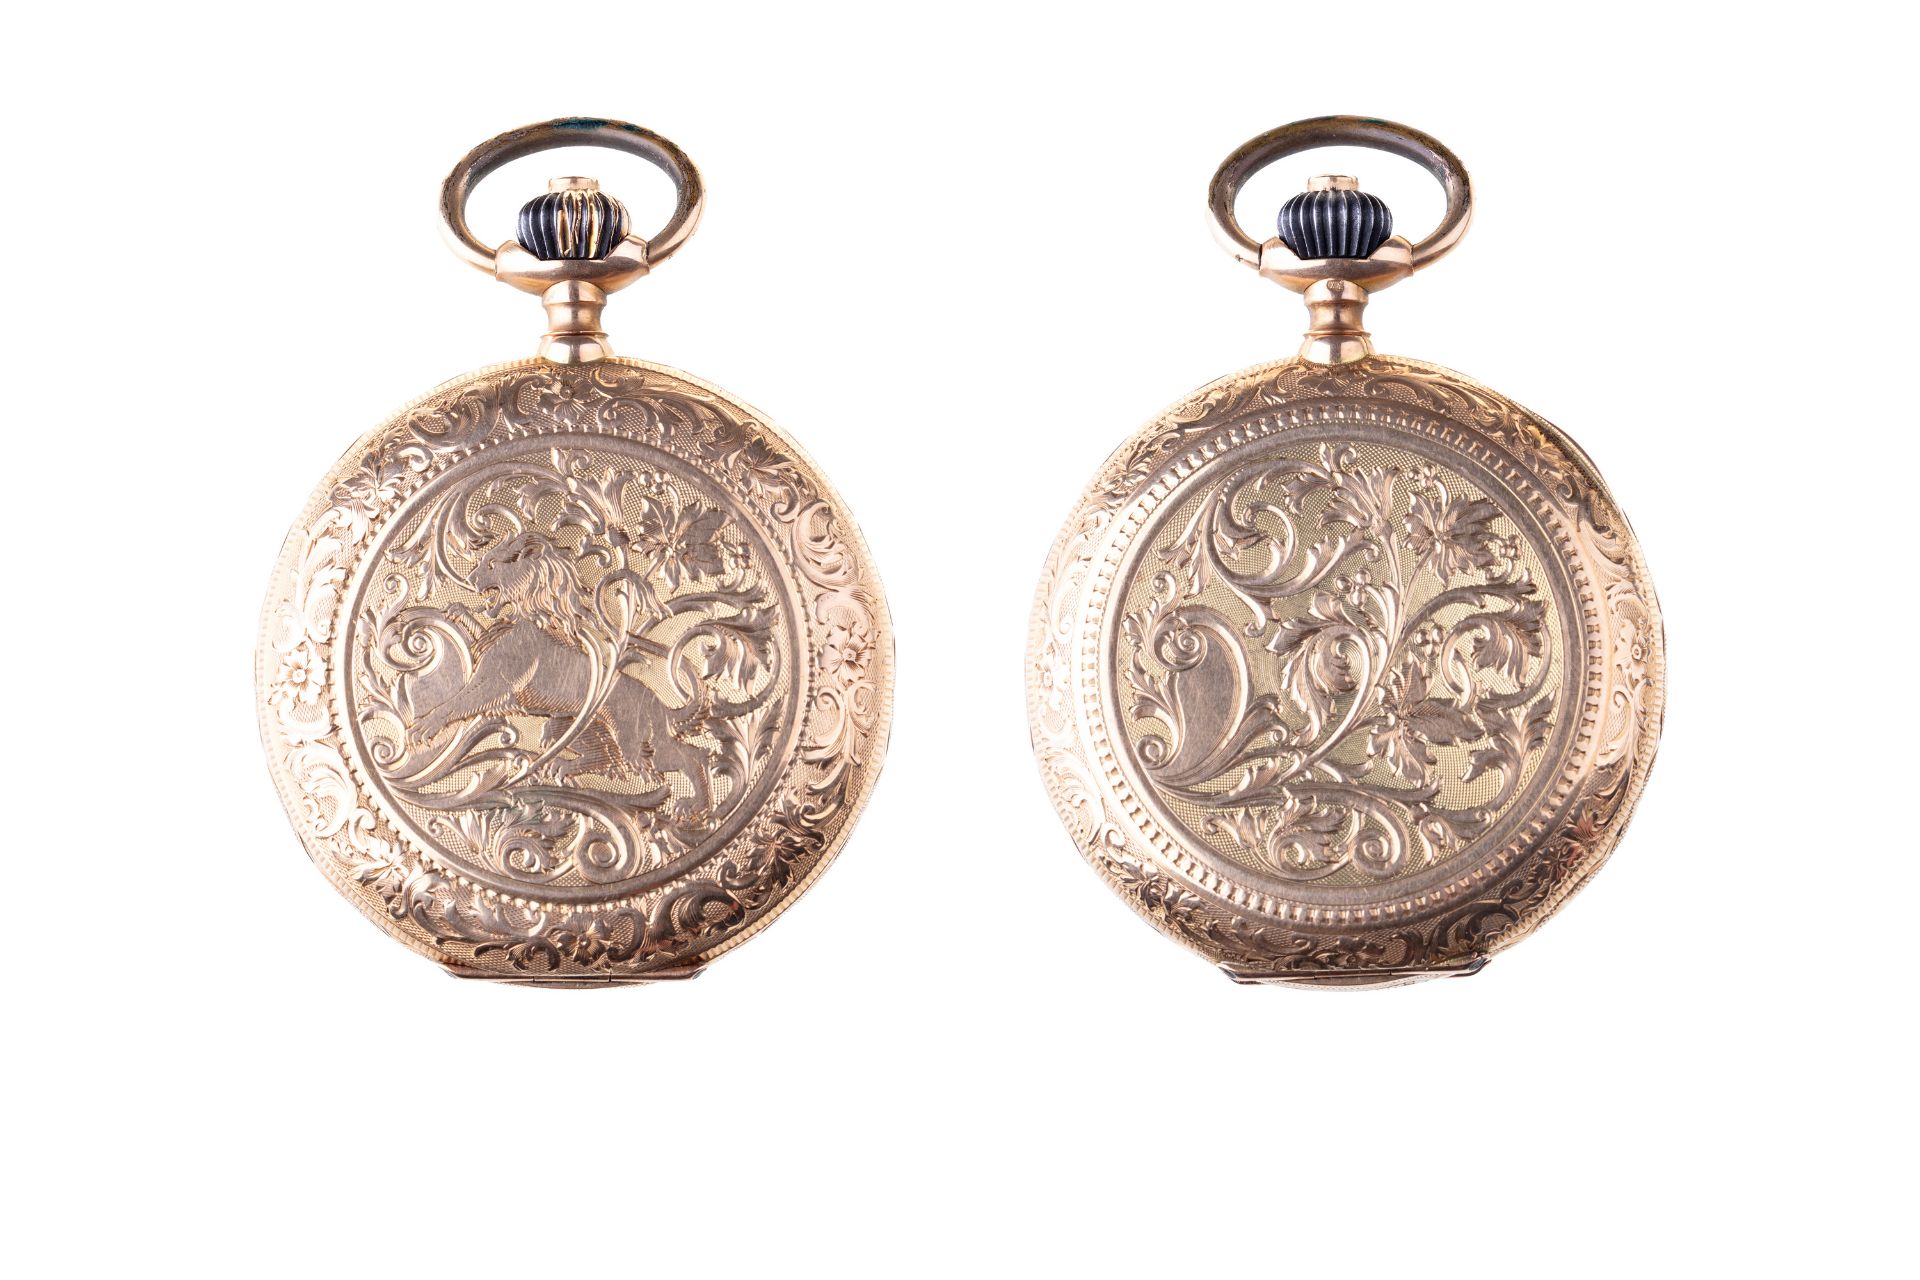 GOLD POCKET WATCH WITH THREE CASES |  (Switzerland - end of the 19th century)